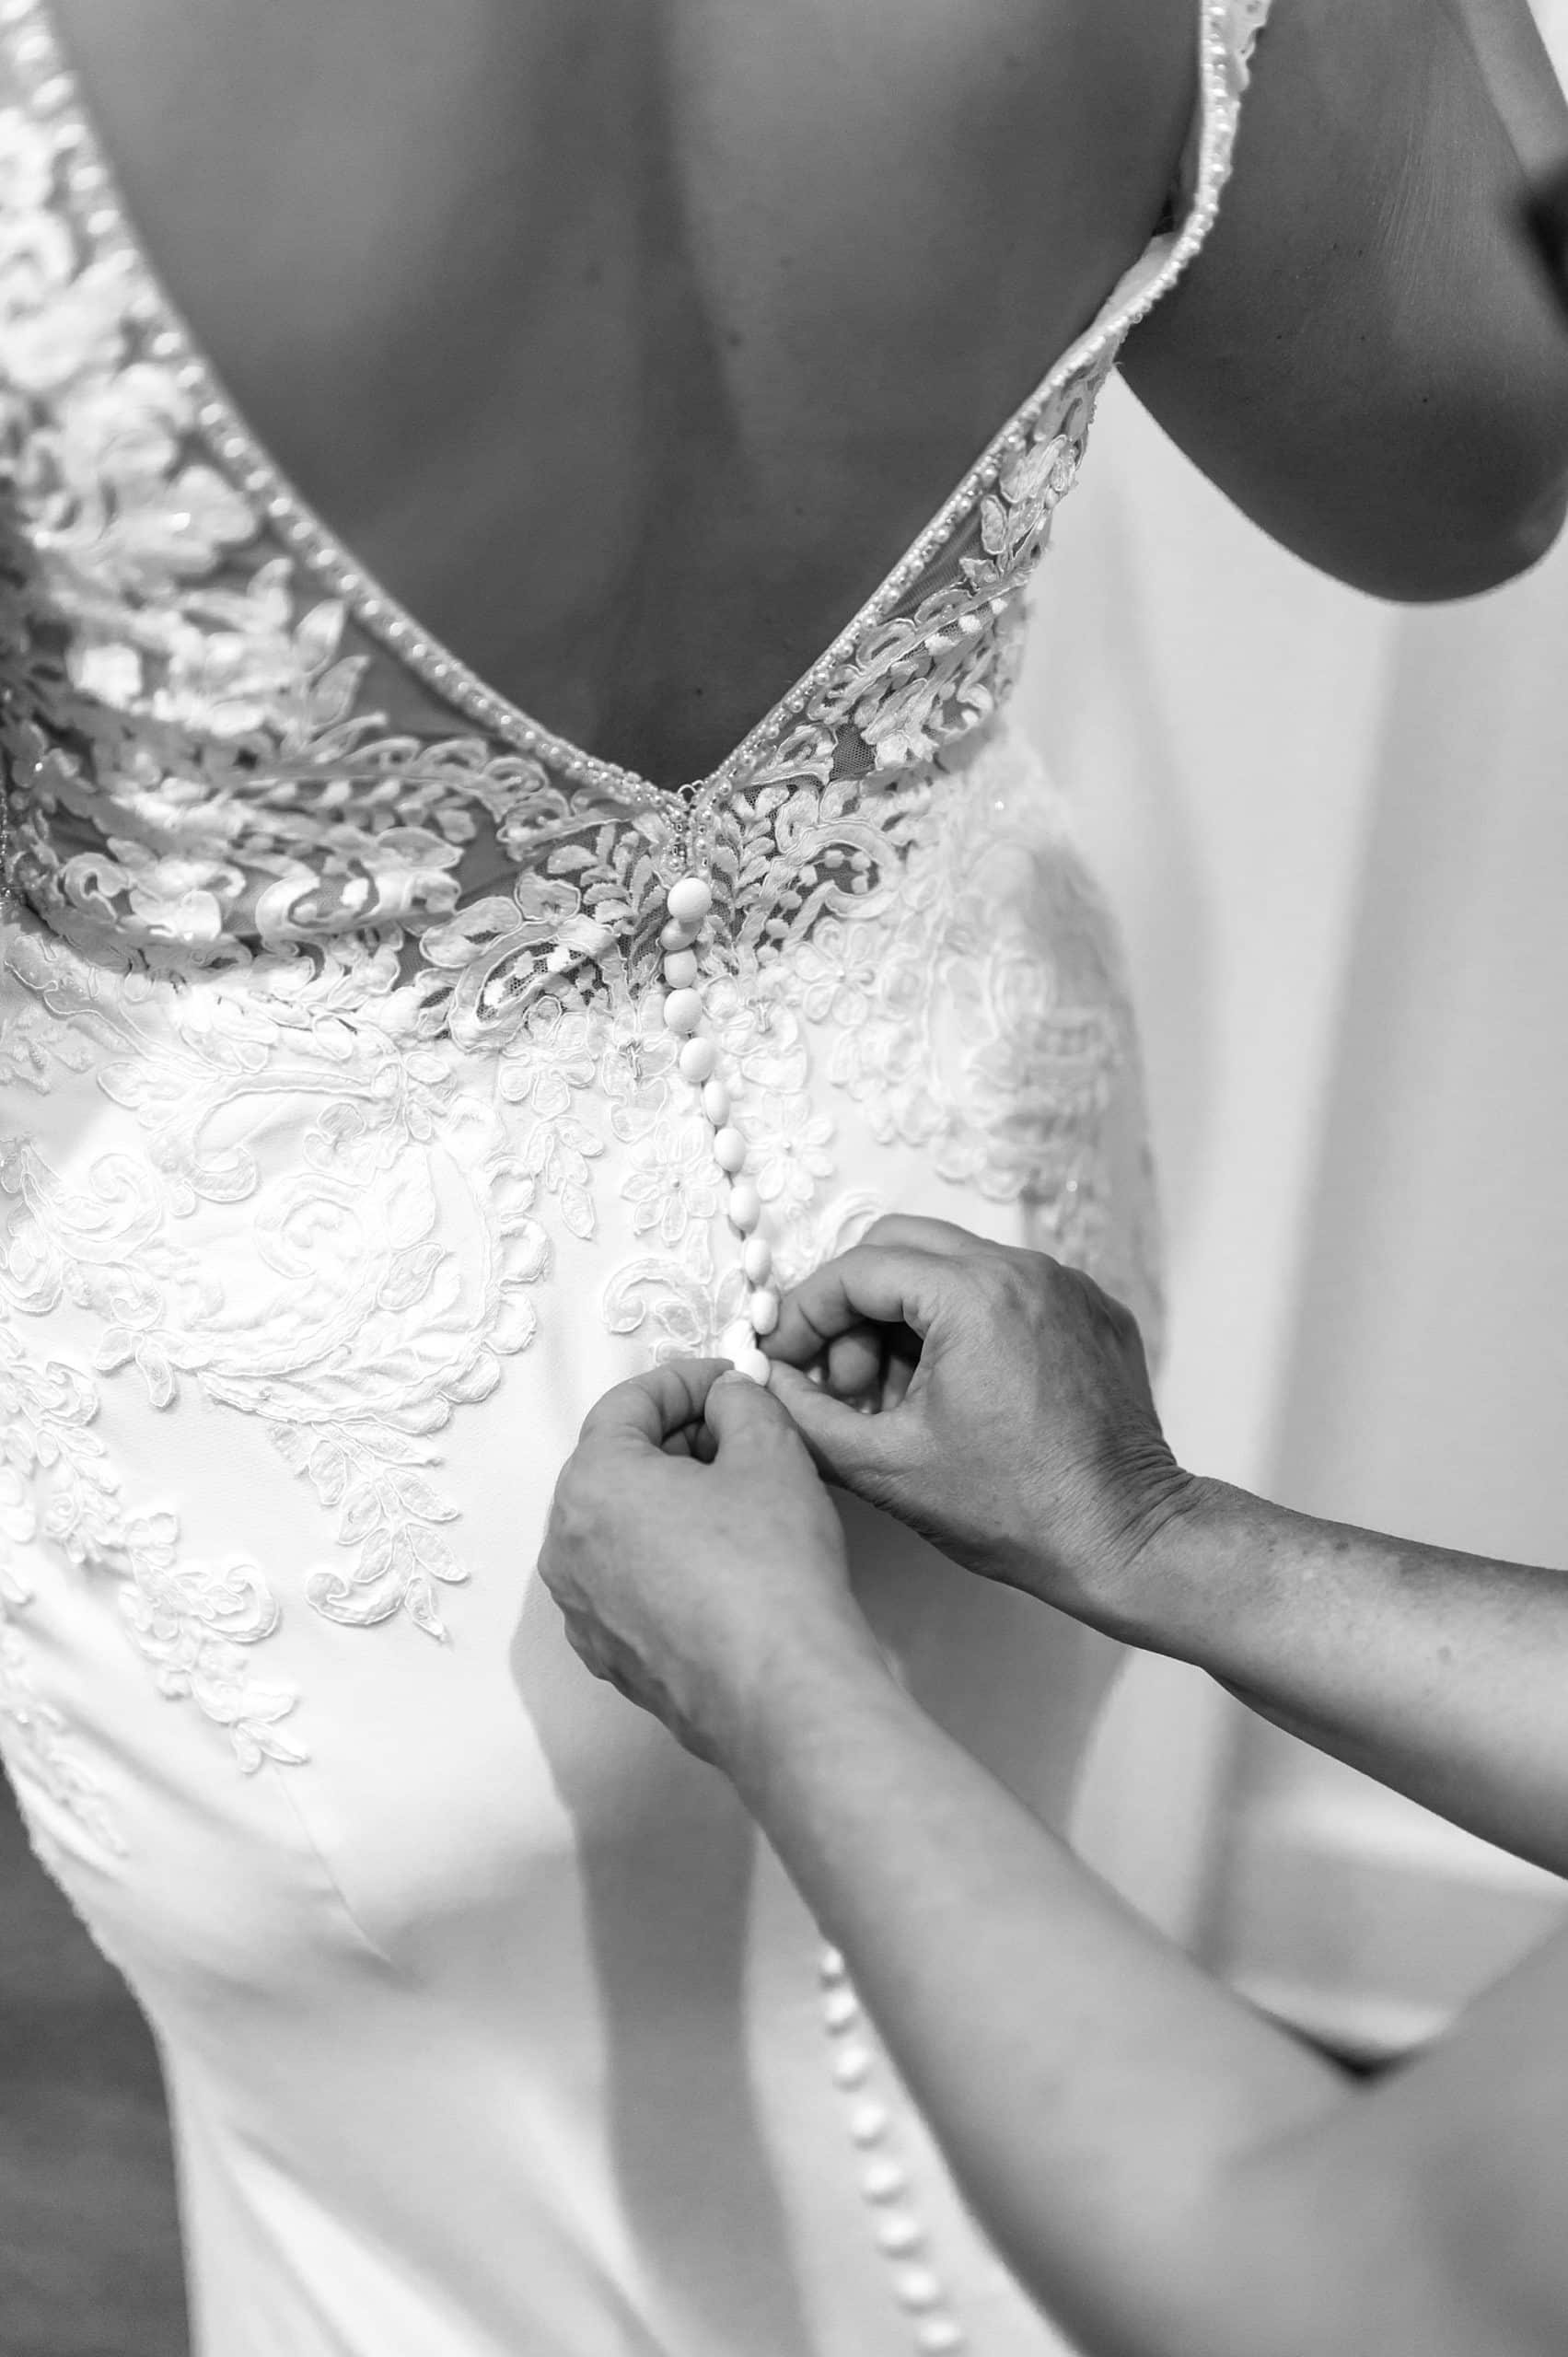 woman helps button up bride's wedding dress